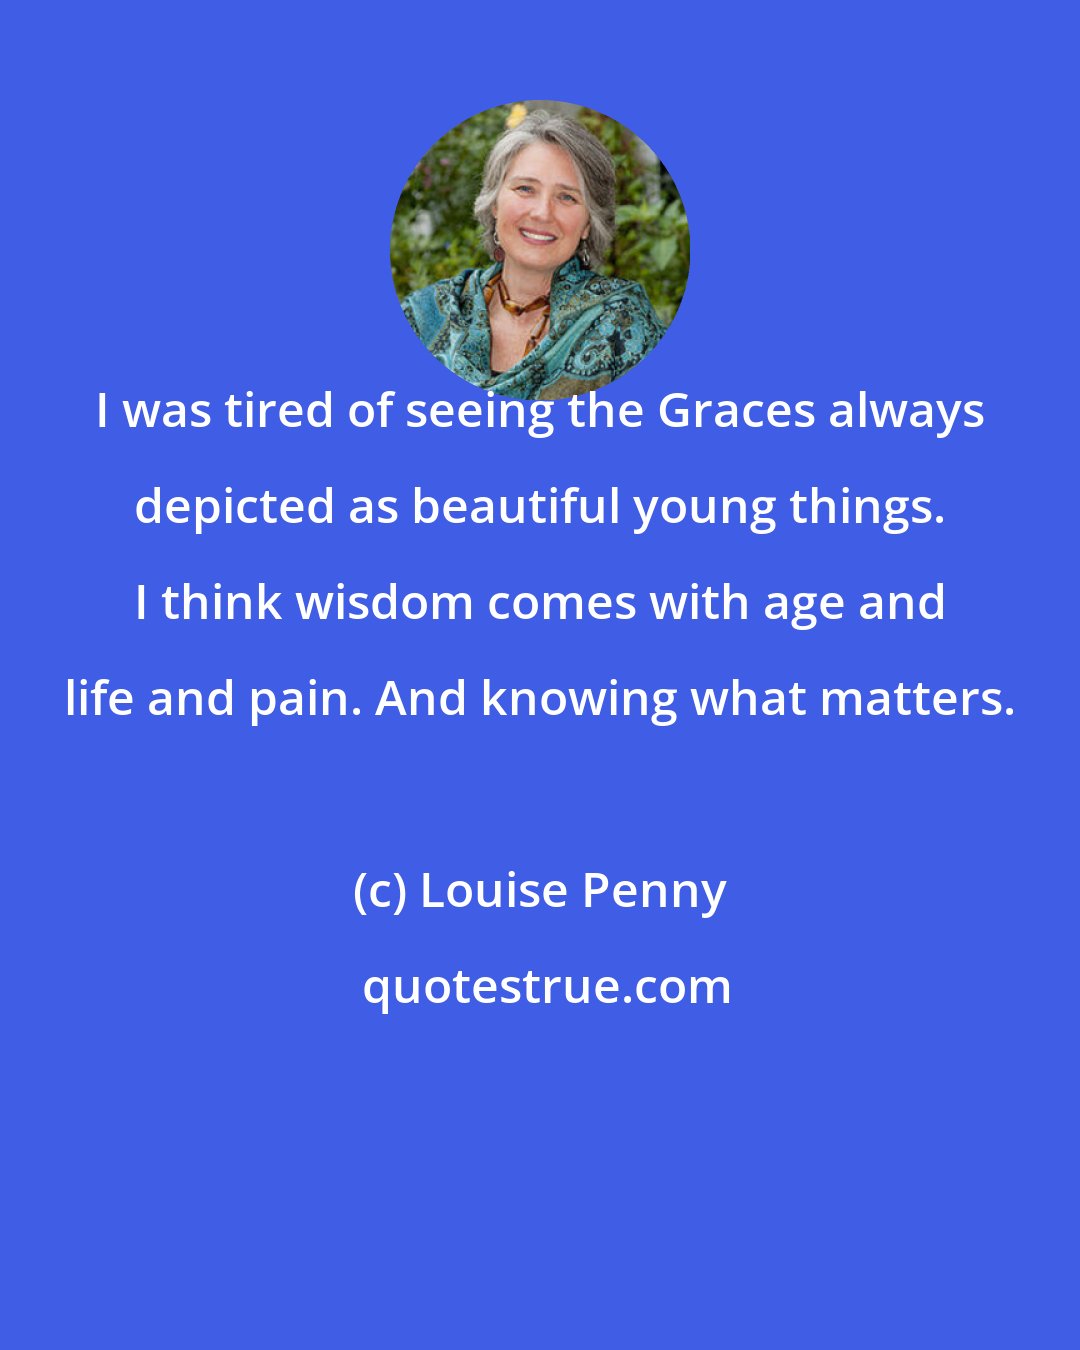 Louise Penny: I was tired of seeing the Graces always depicted as beautiful young things. I think wisdom comes with age and life and pain. And knowing what matters.